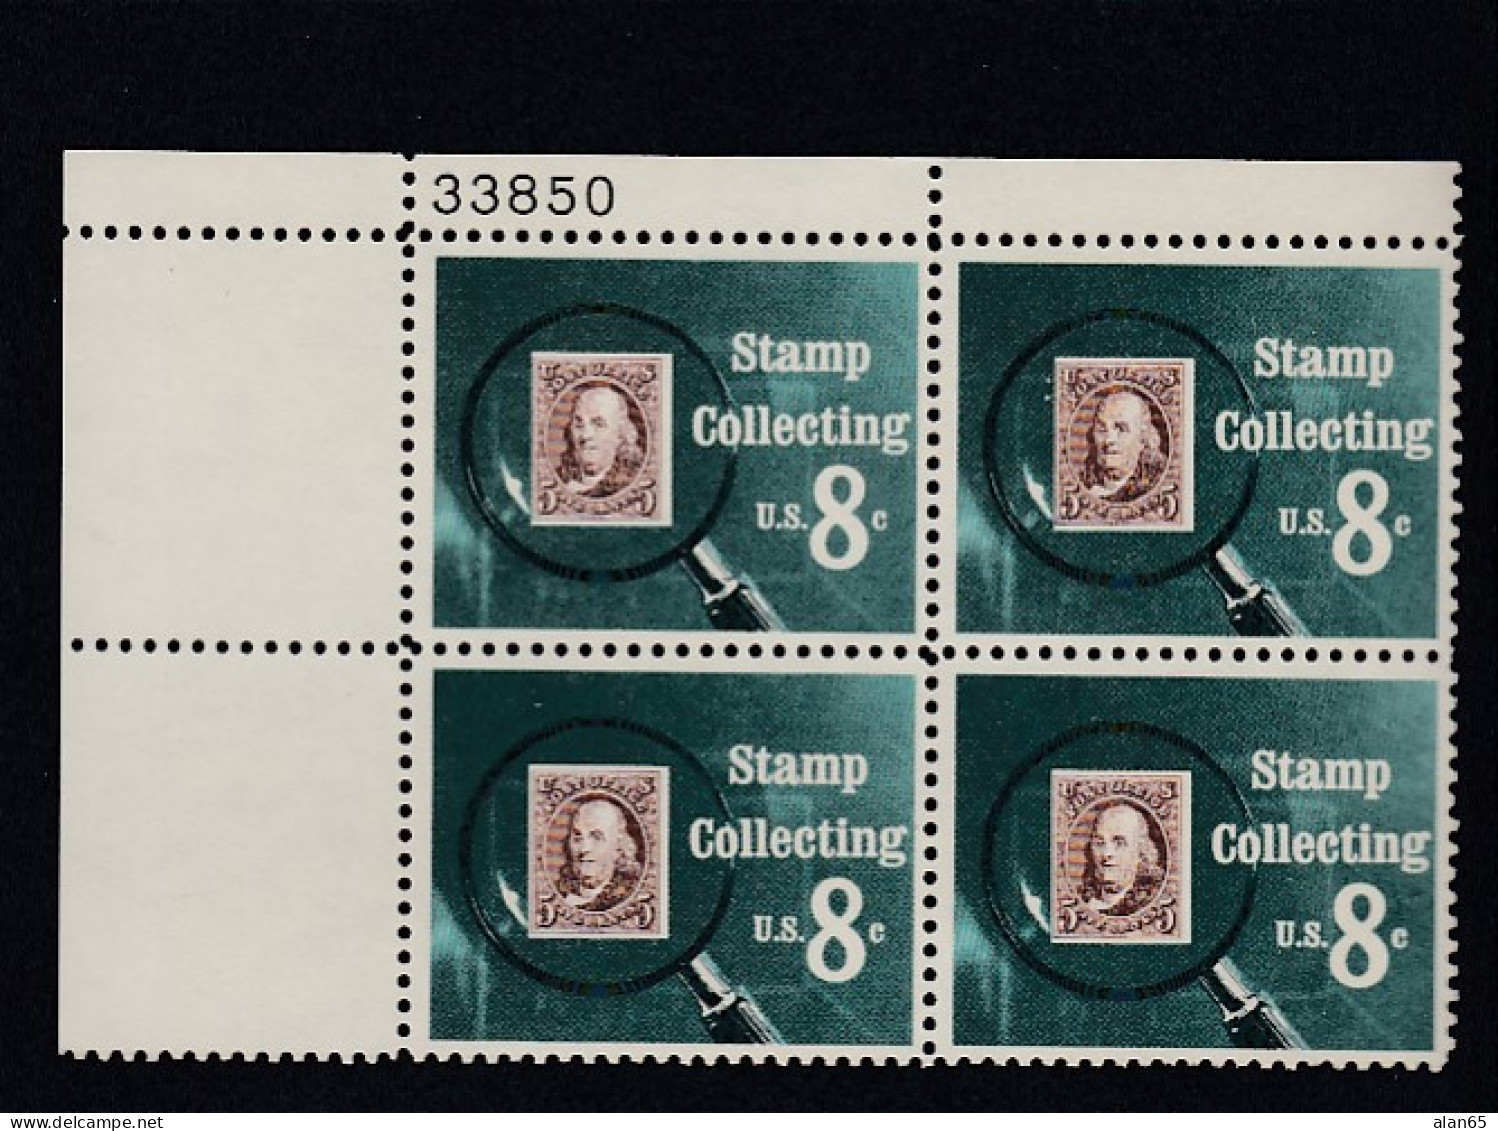 Sc#1474, 8-cent Stamp Collecting Theme 1972 Issue, Plate # Block Of 4 US Stamps - Números De Placas